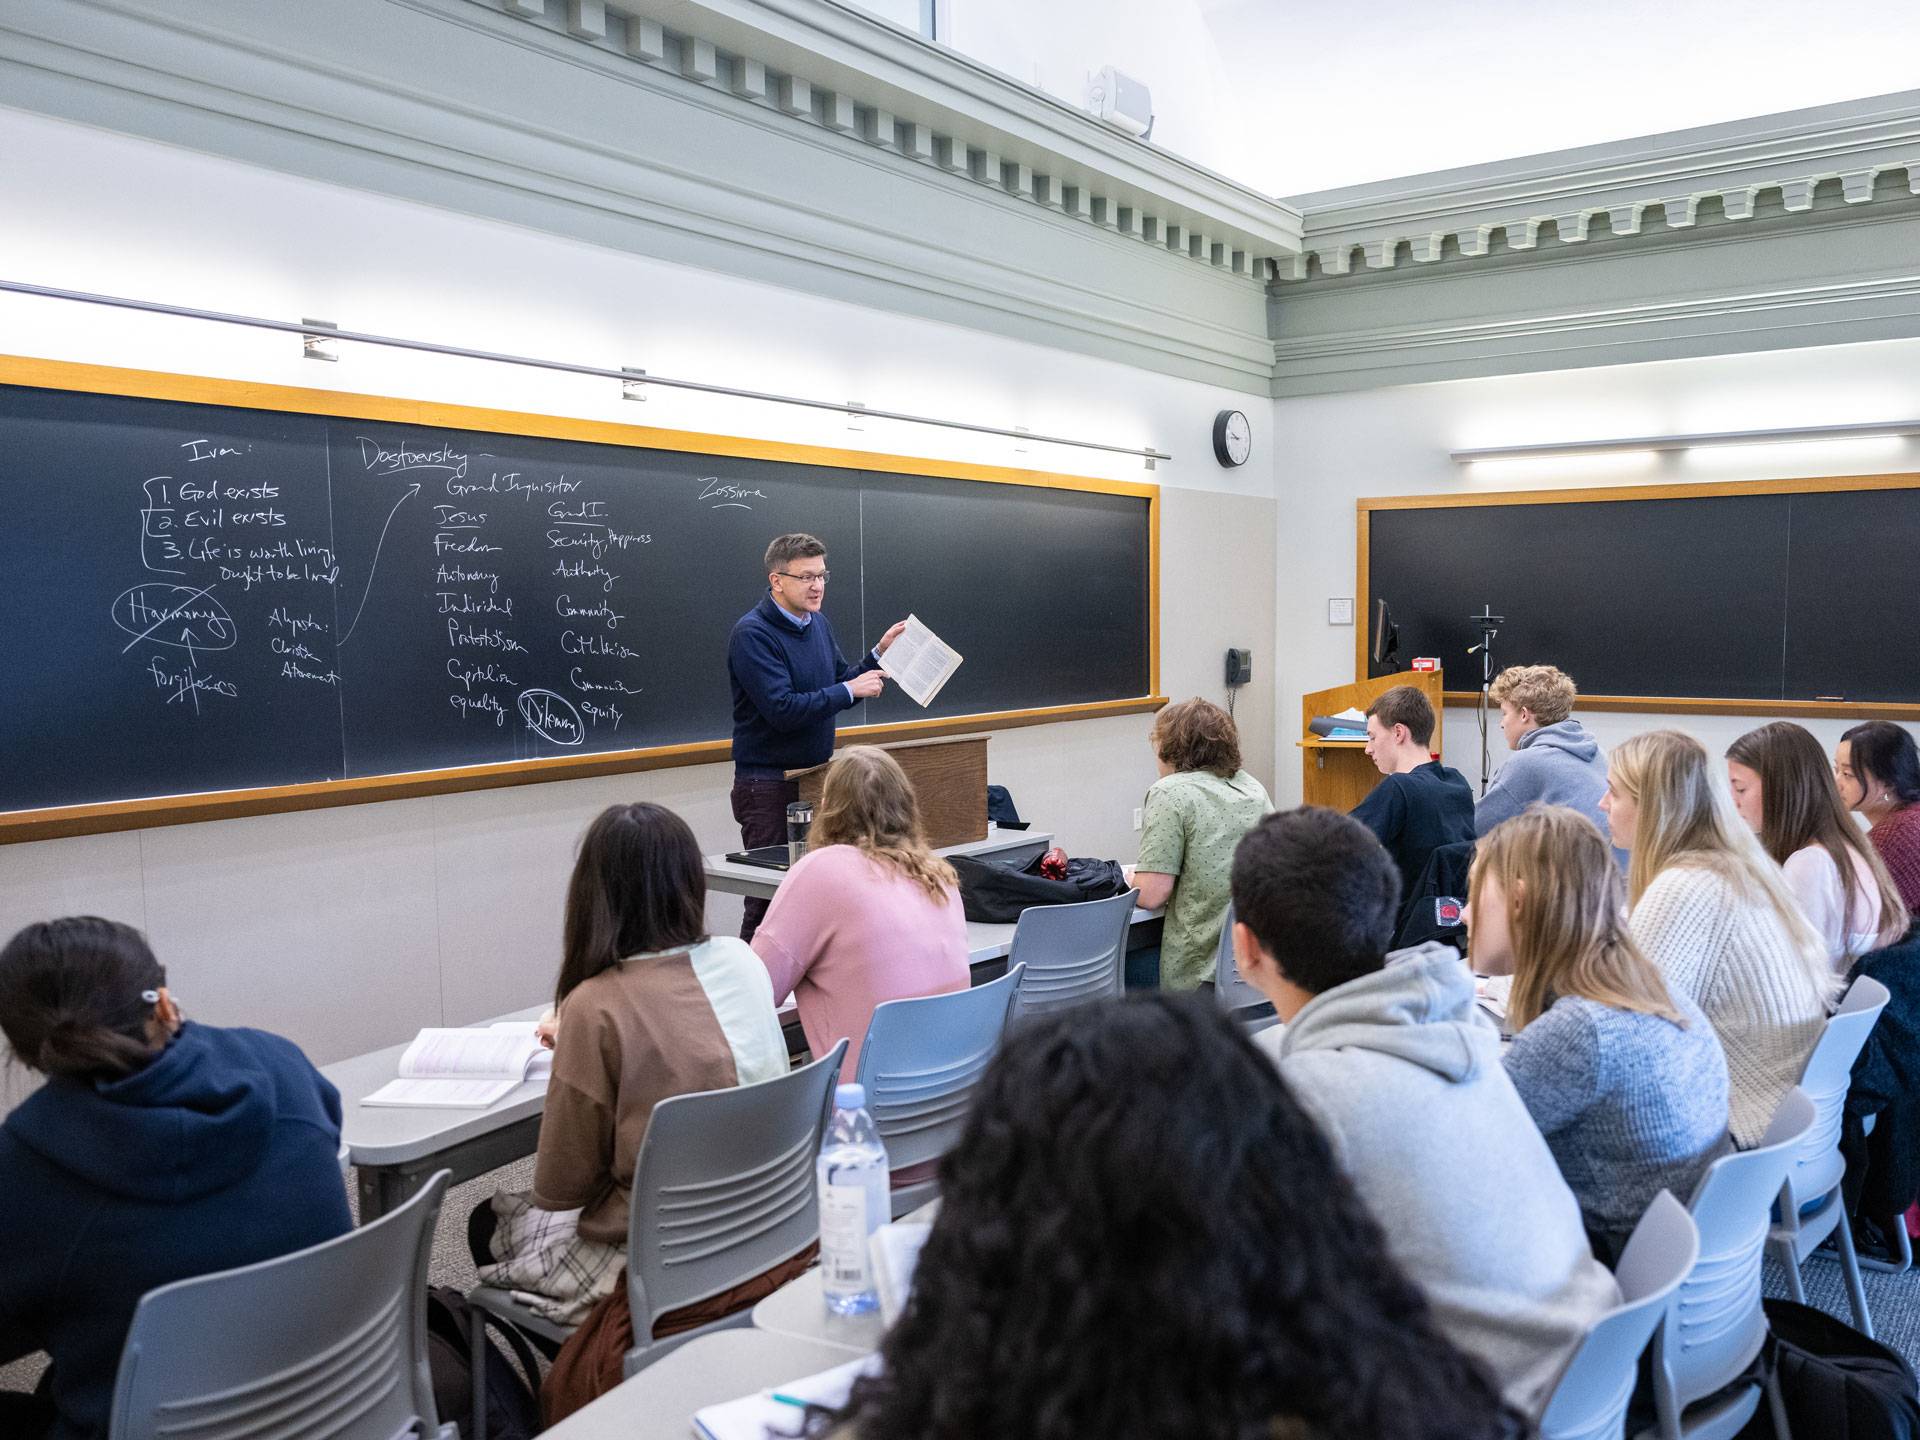 A male professor in a blue sweater in front of a blackboard instructs a class of students